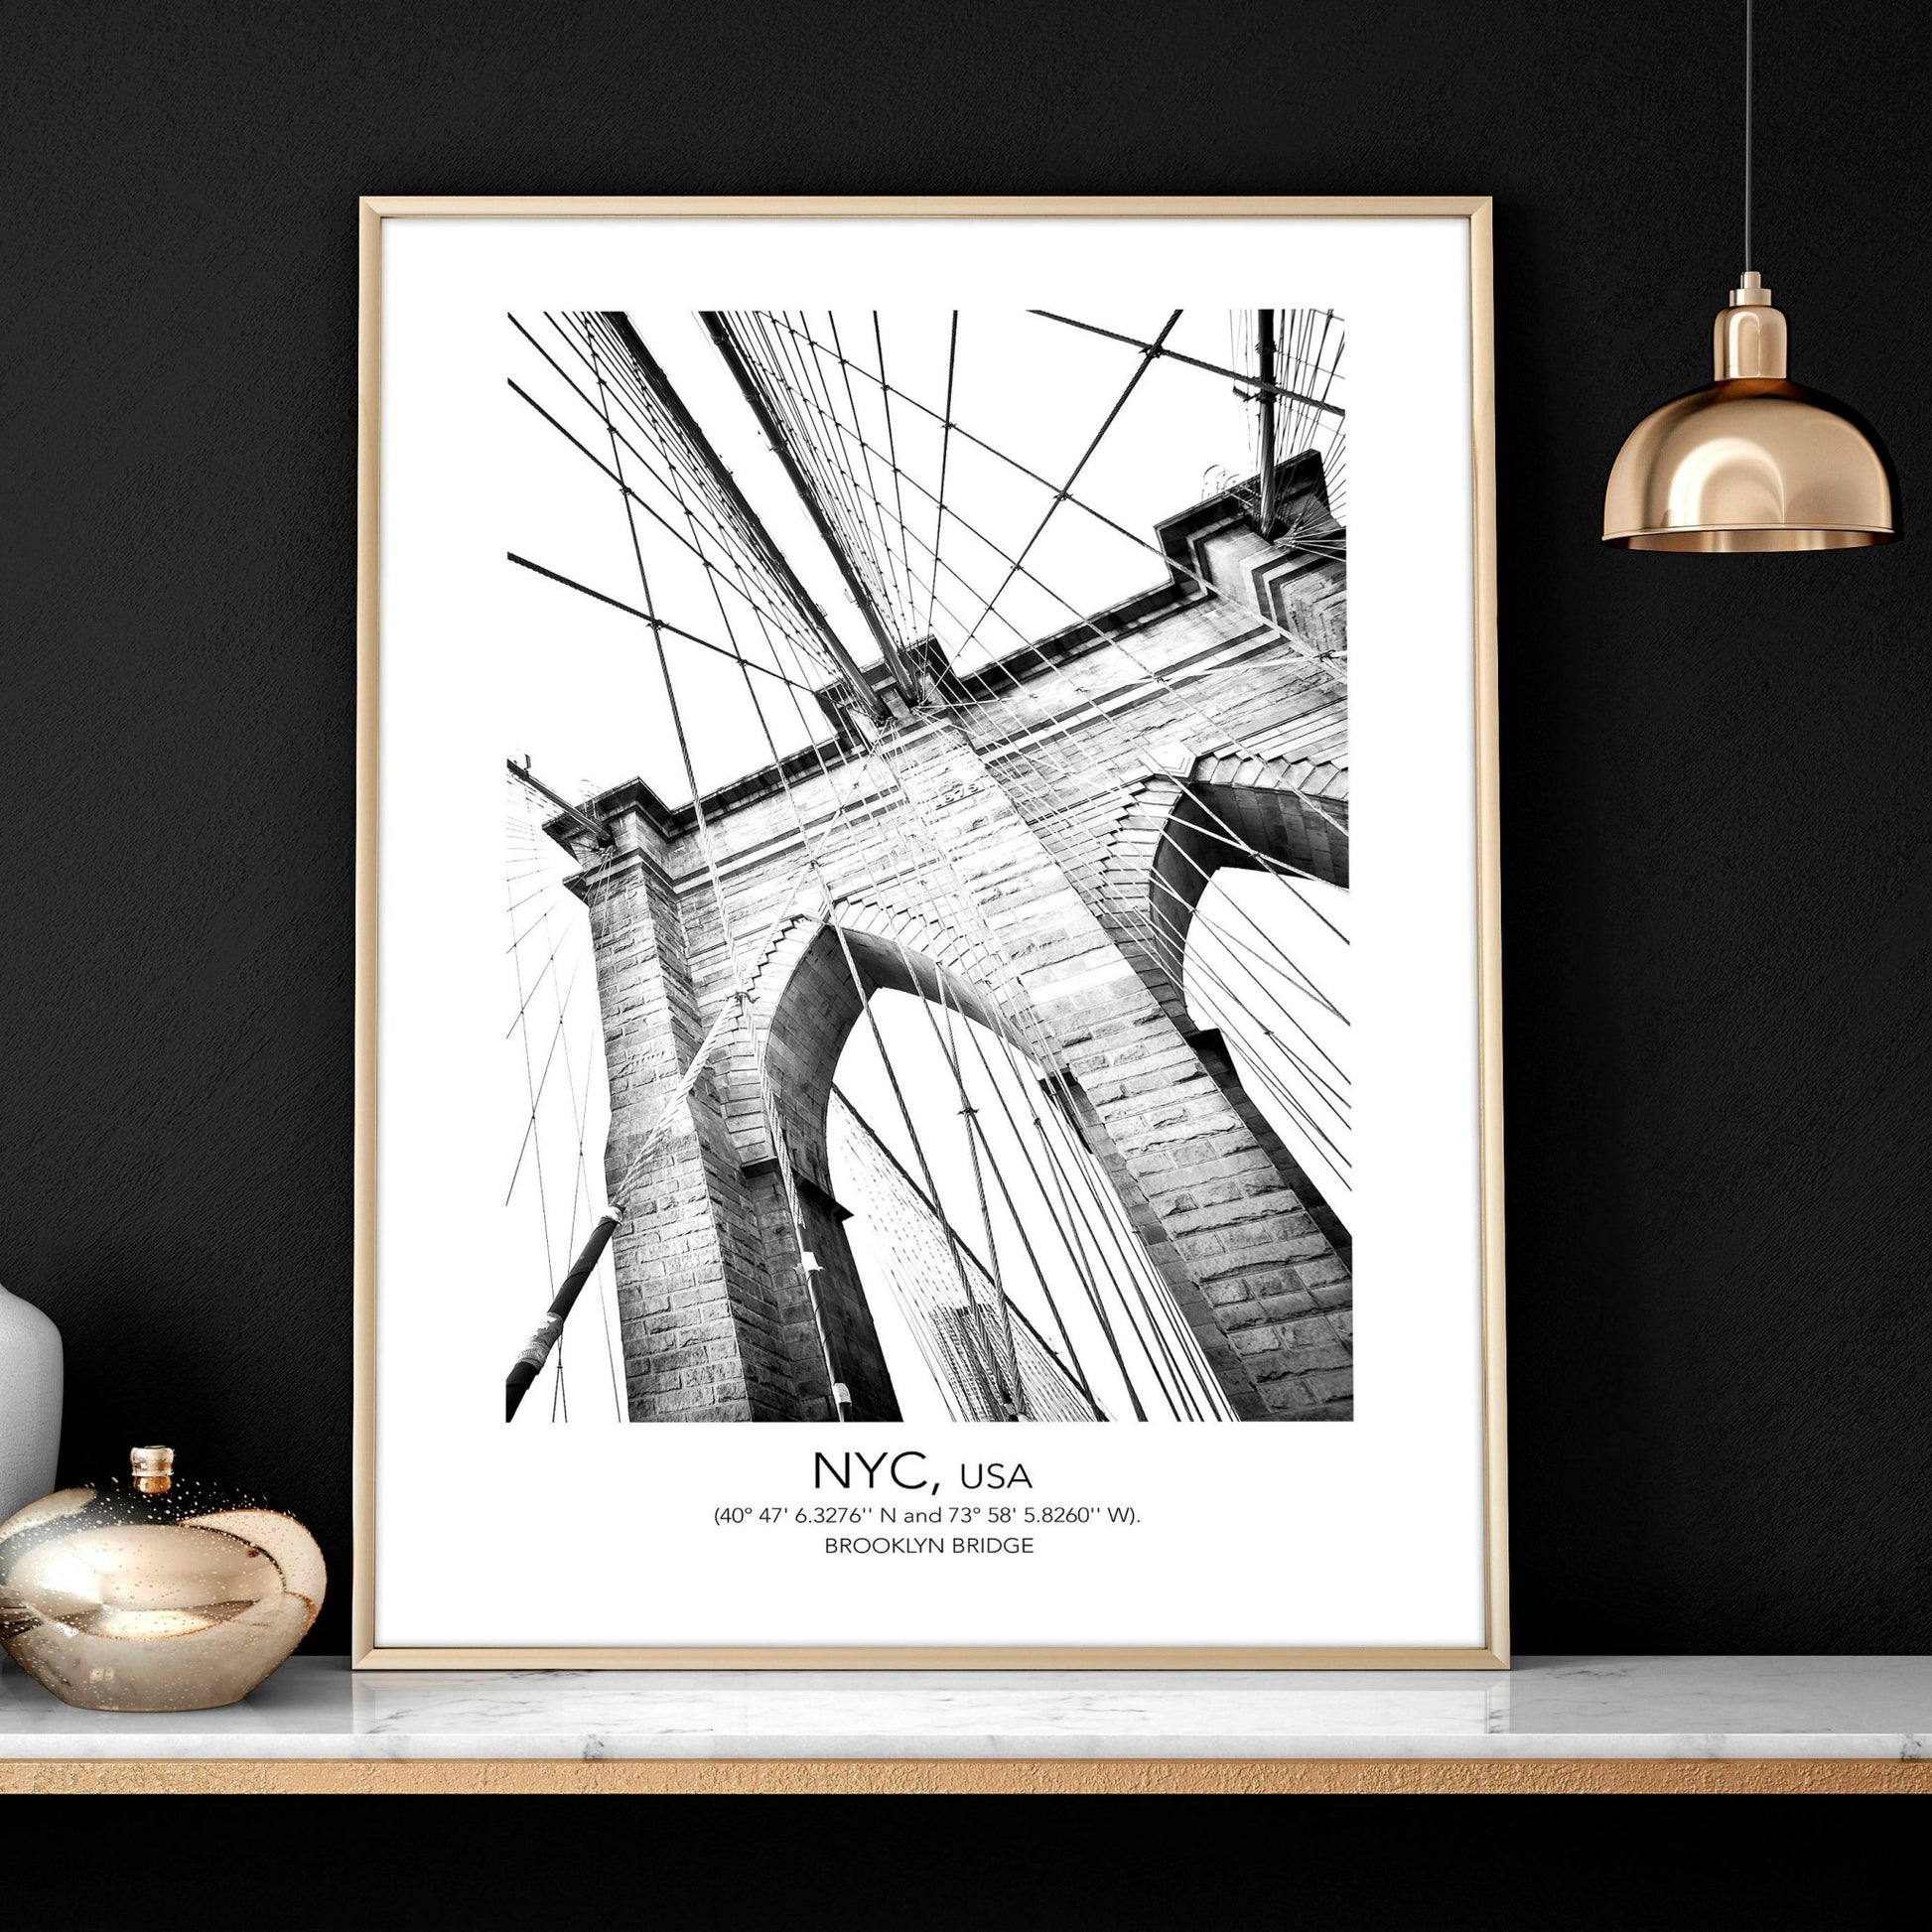 White and black art for living room | set of 3 New York wall prints